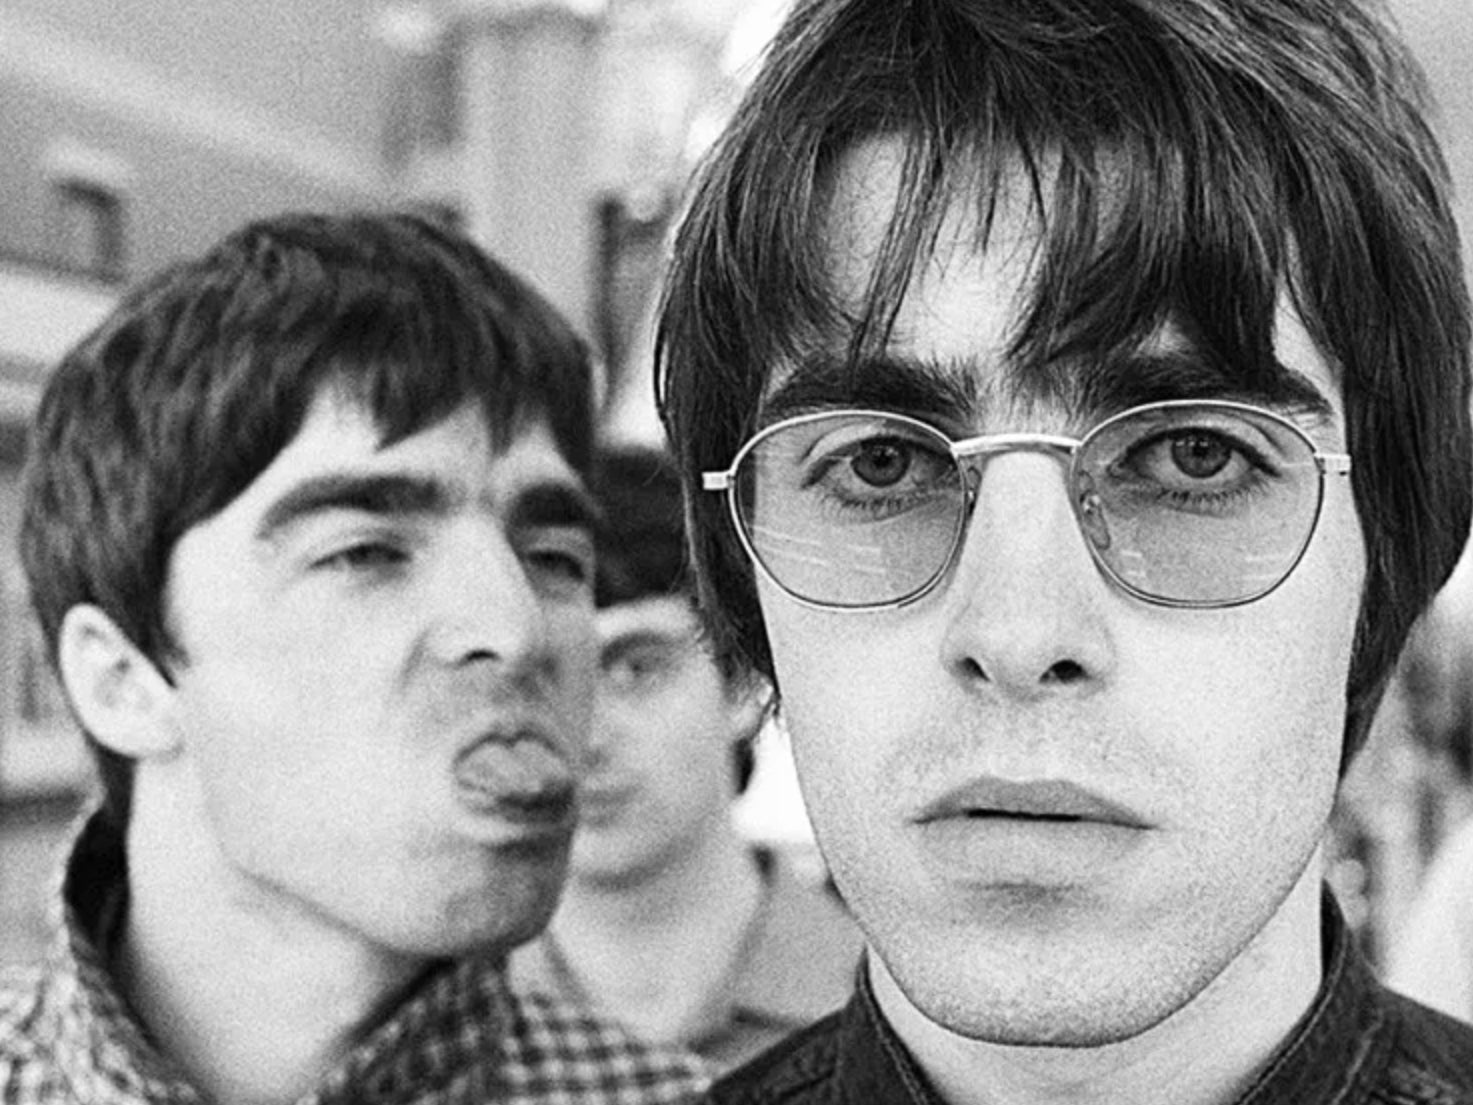 ‘He seems to be doing well, man. Seems to be a lot happier in his skin,’ Liam Gallagher on his brother Noel